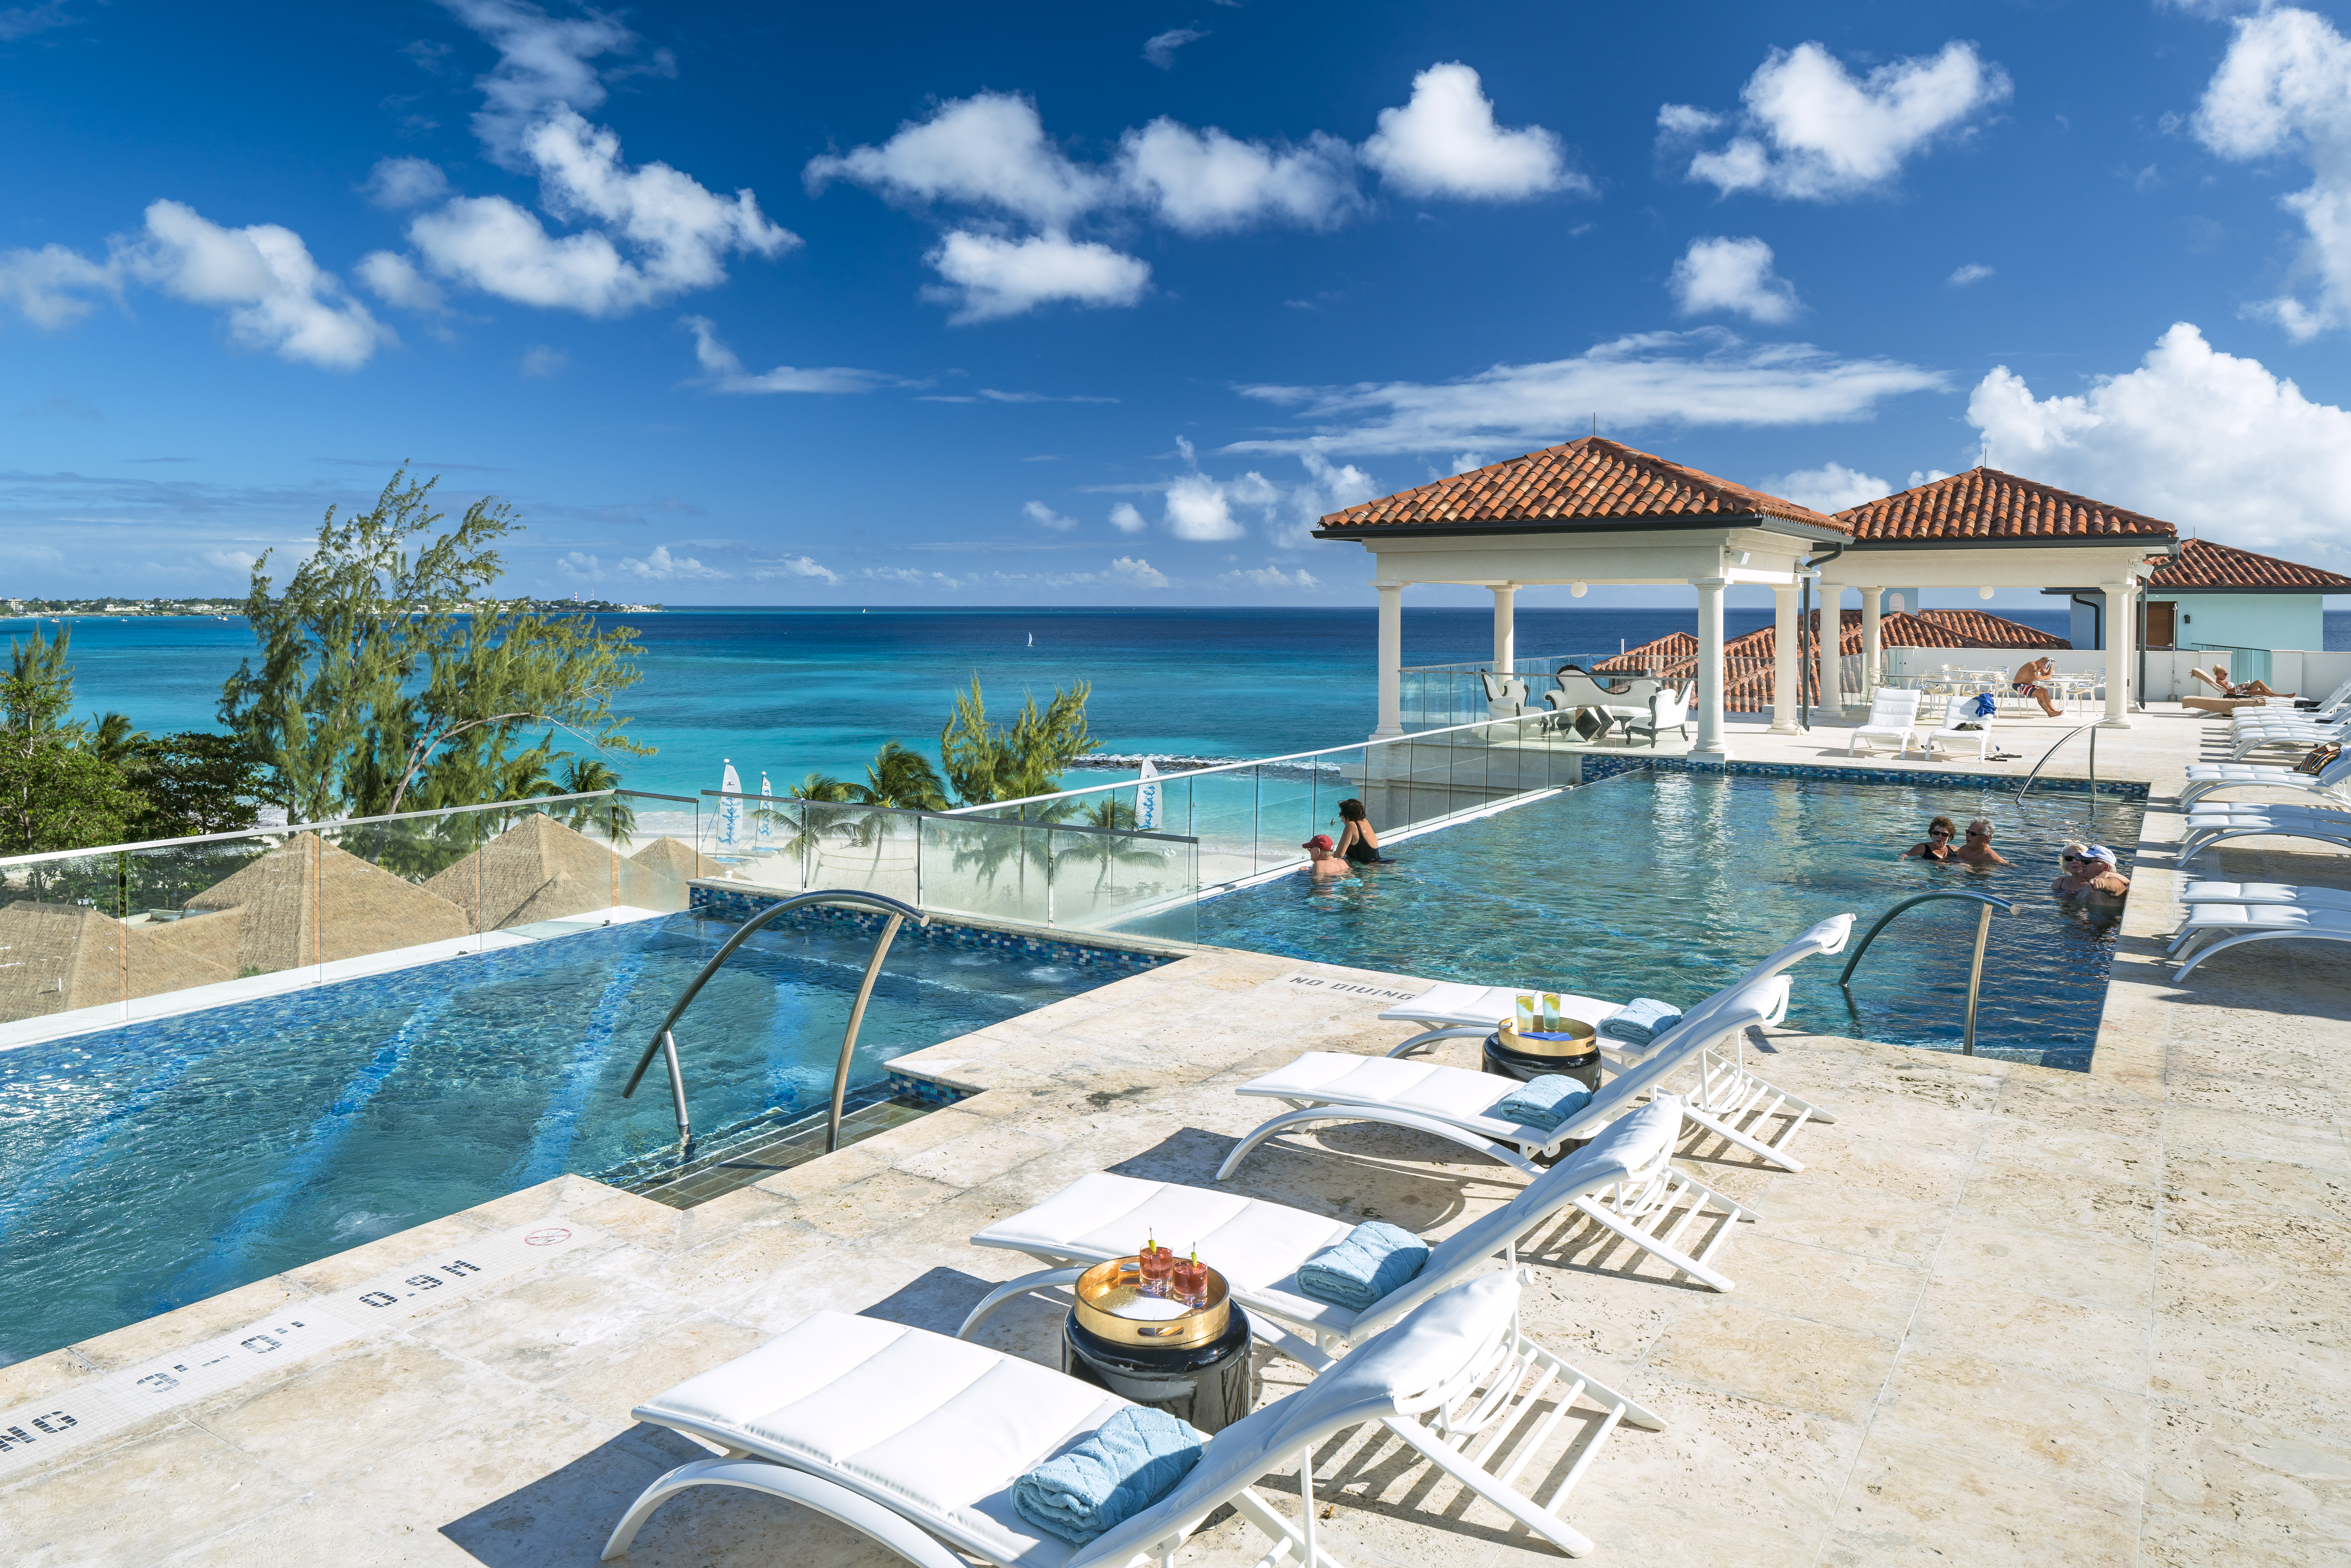 5 Things You Will Love About Barbados